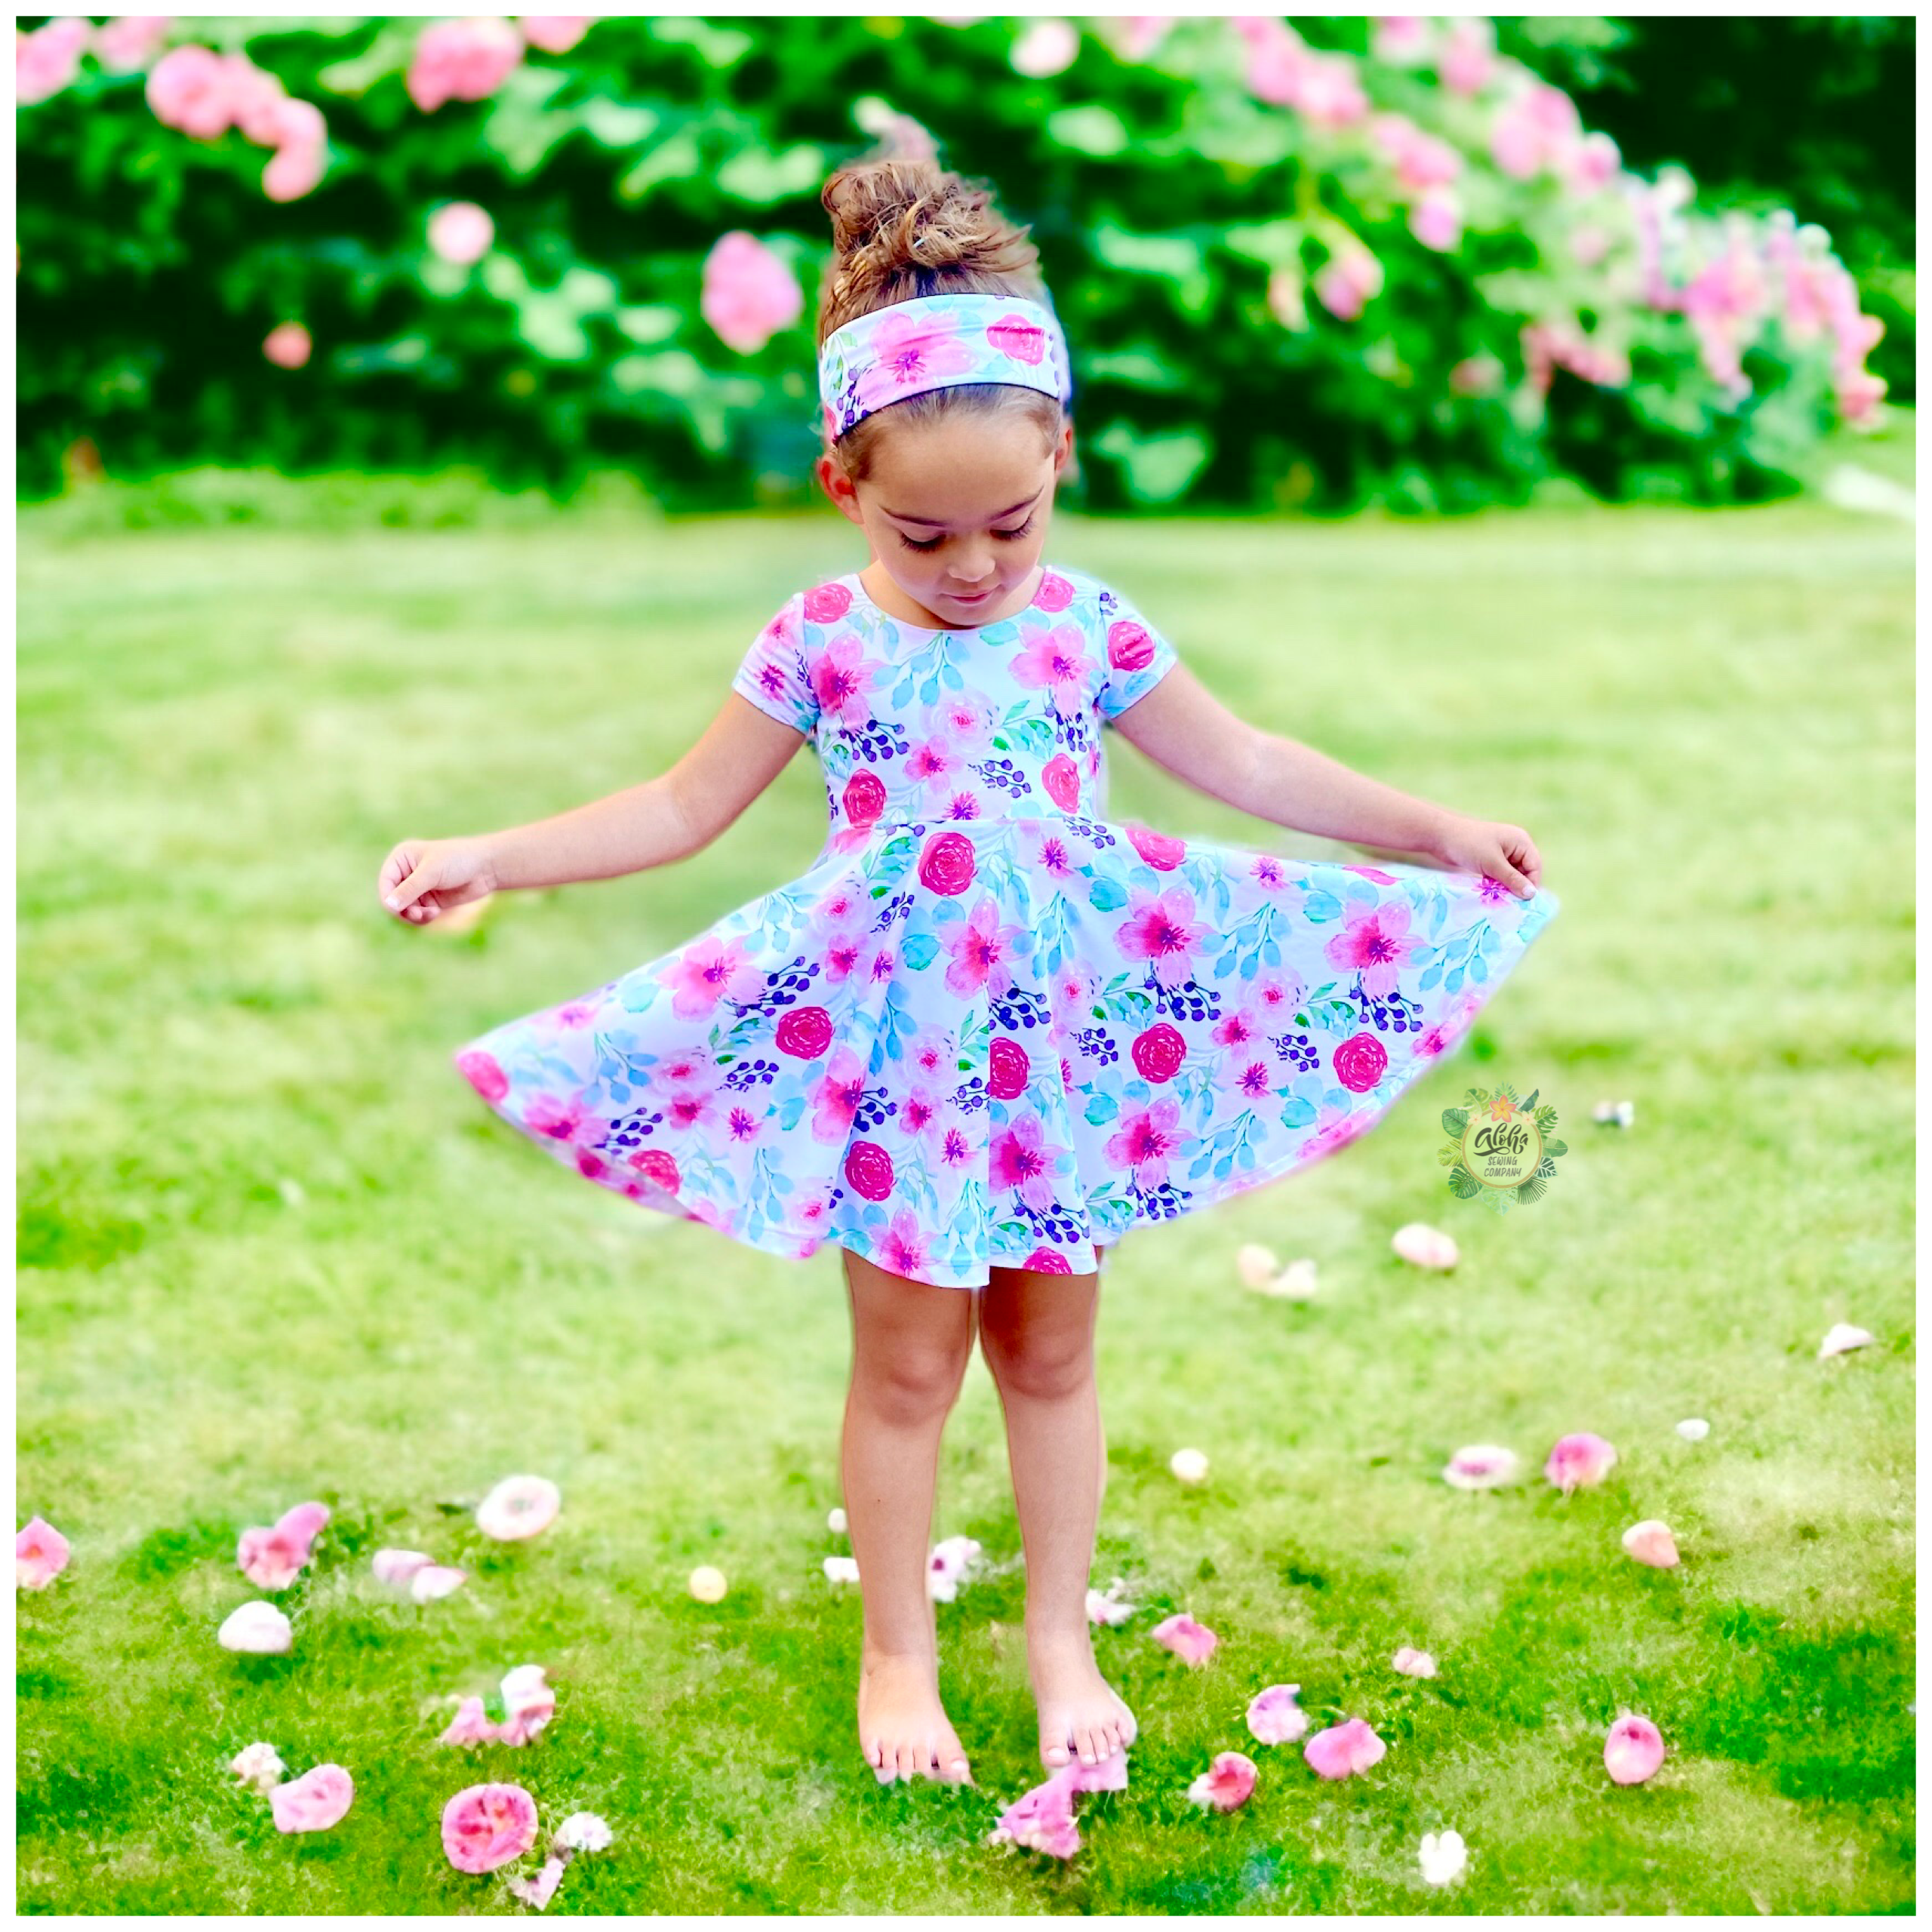 Reversible Dress Pattern For Your Little Girl - Sewing Tutorial